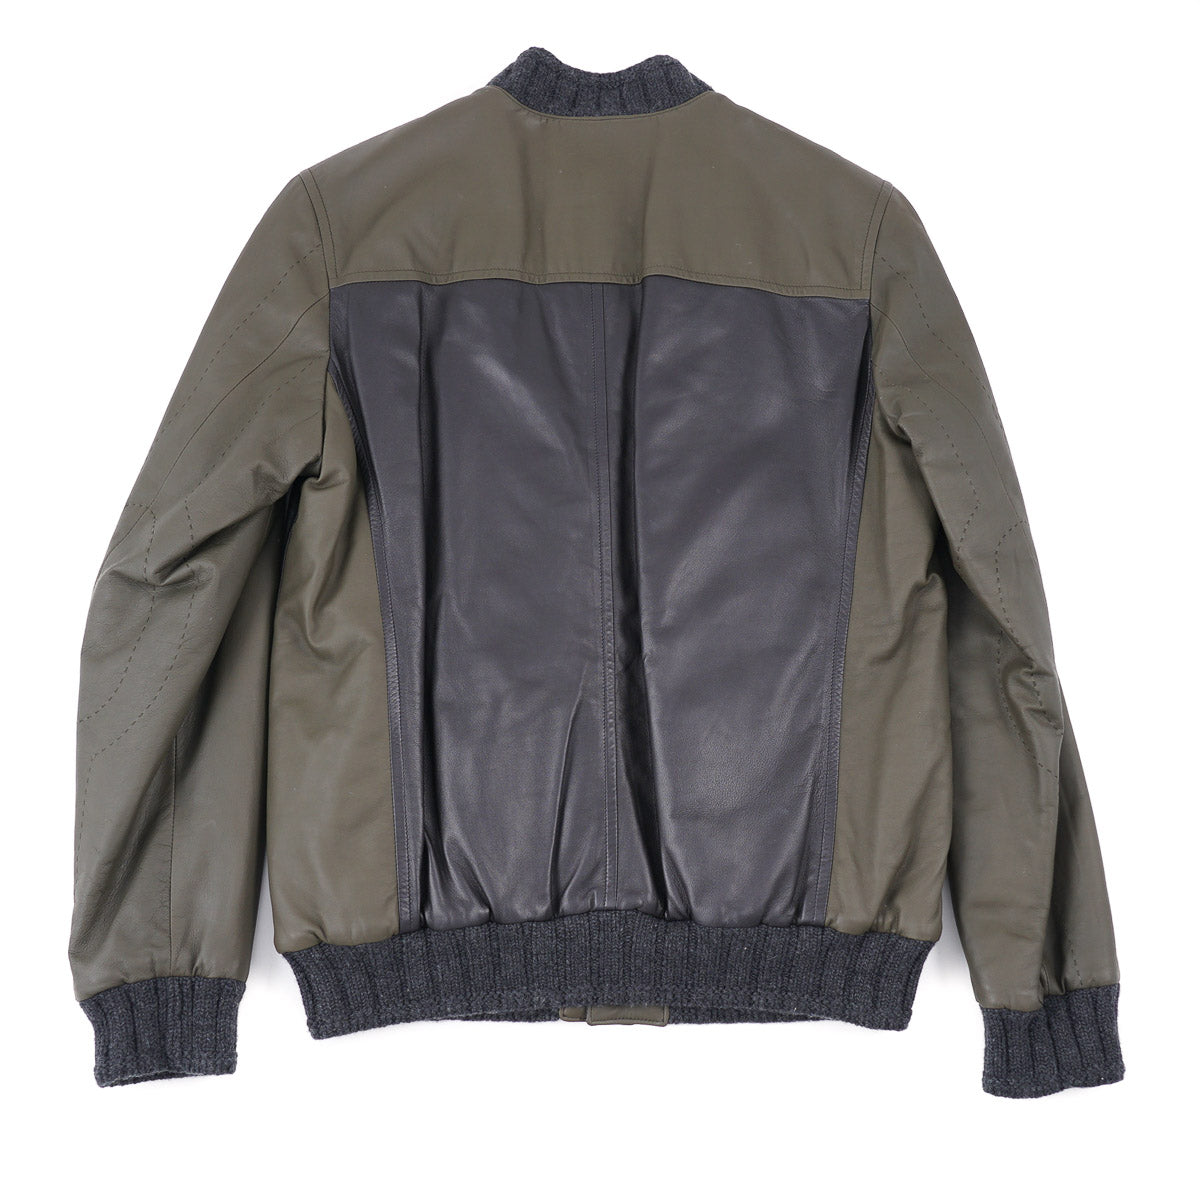 Kiton Lambskin Leather Jacket with Down Fill - Top Shelf Apparel